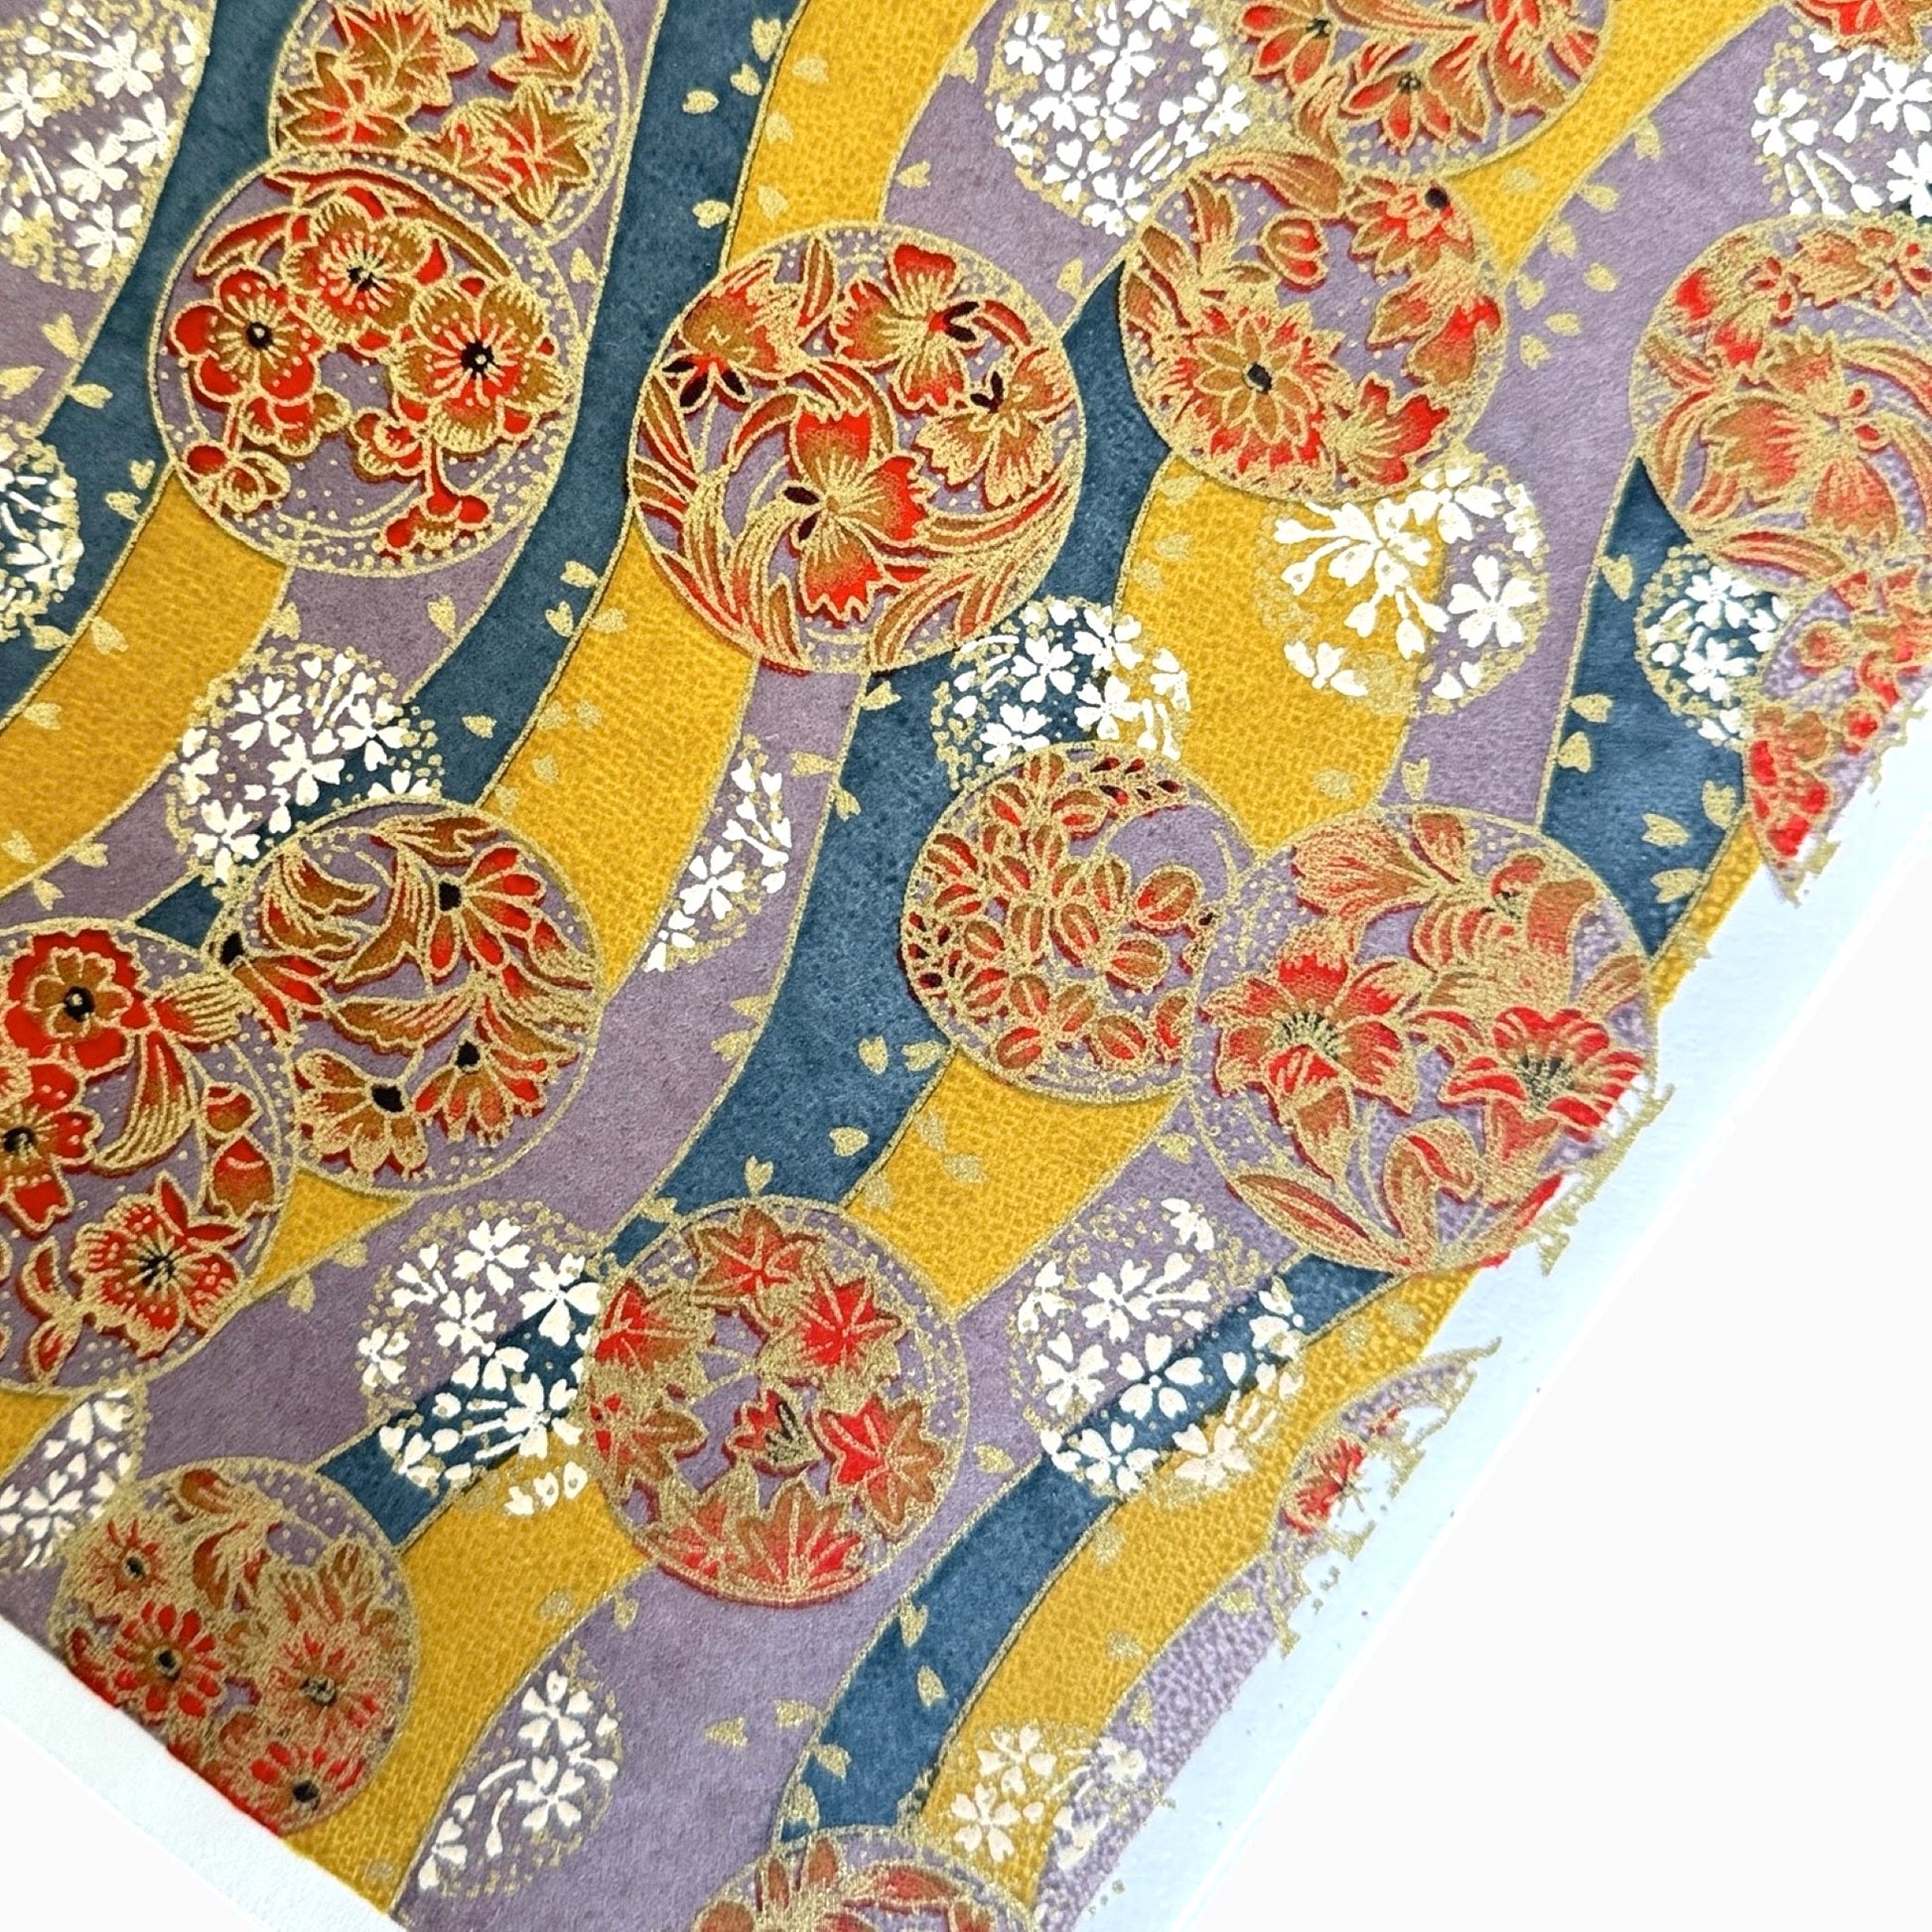 Japanese silkscreen chiyogami paper with a traditional botanical circle motif in tones of mustard, inky blue, lilac and gold.